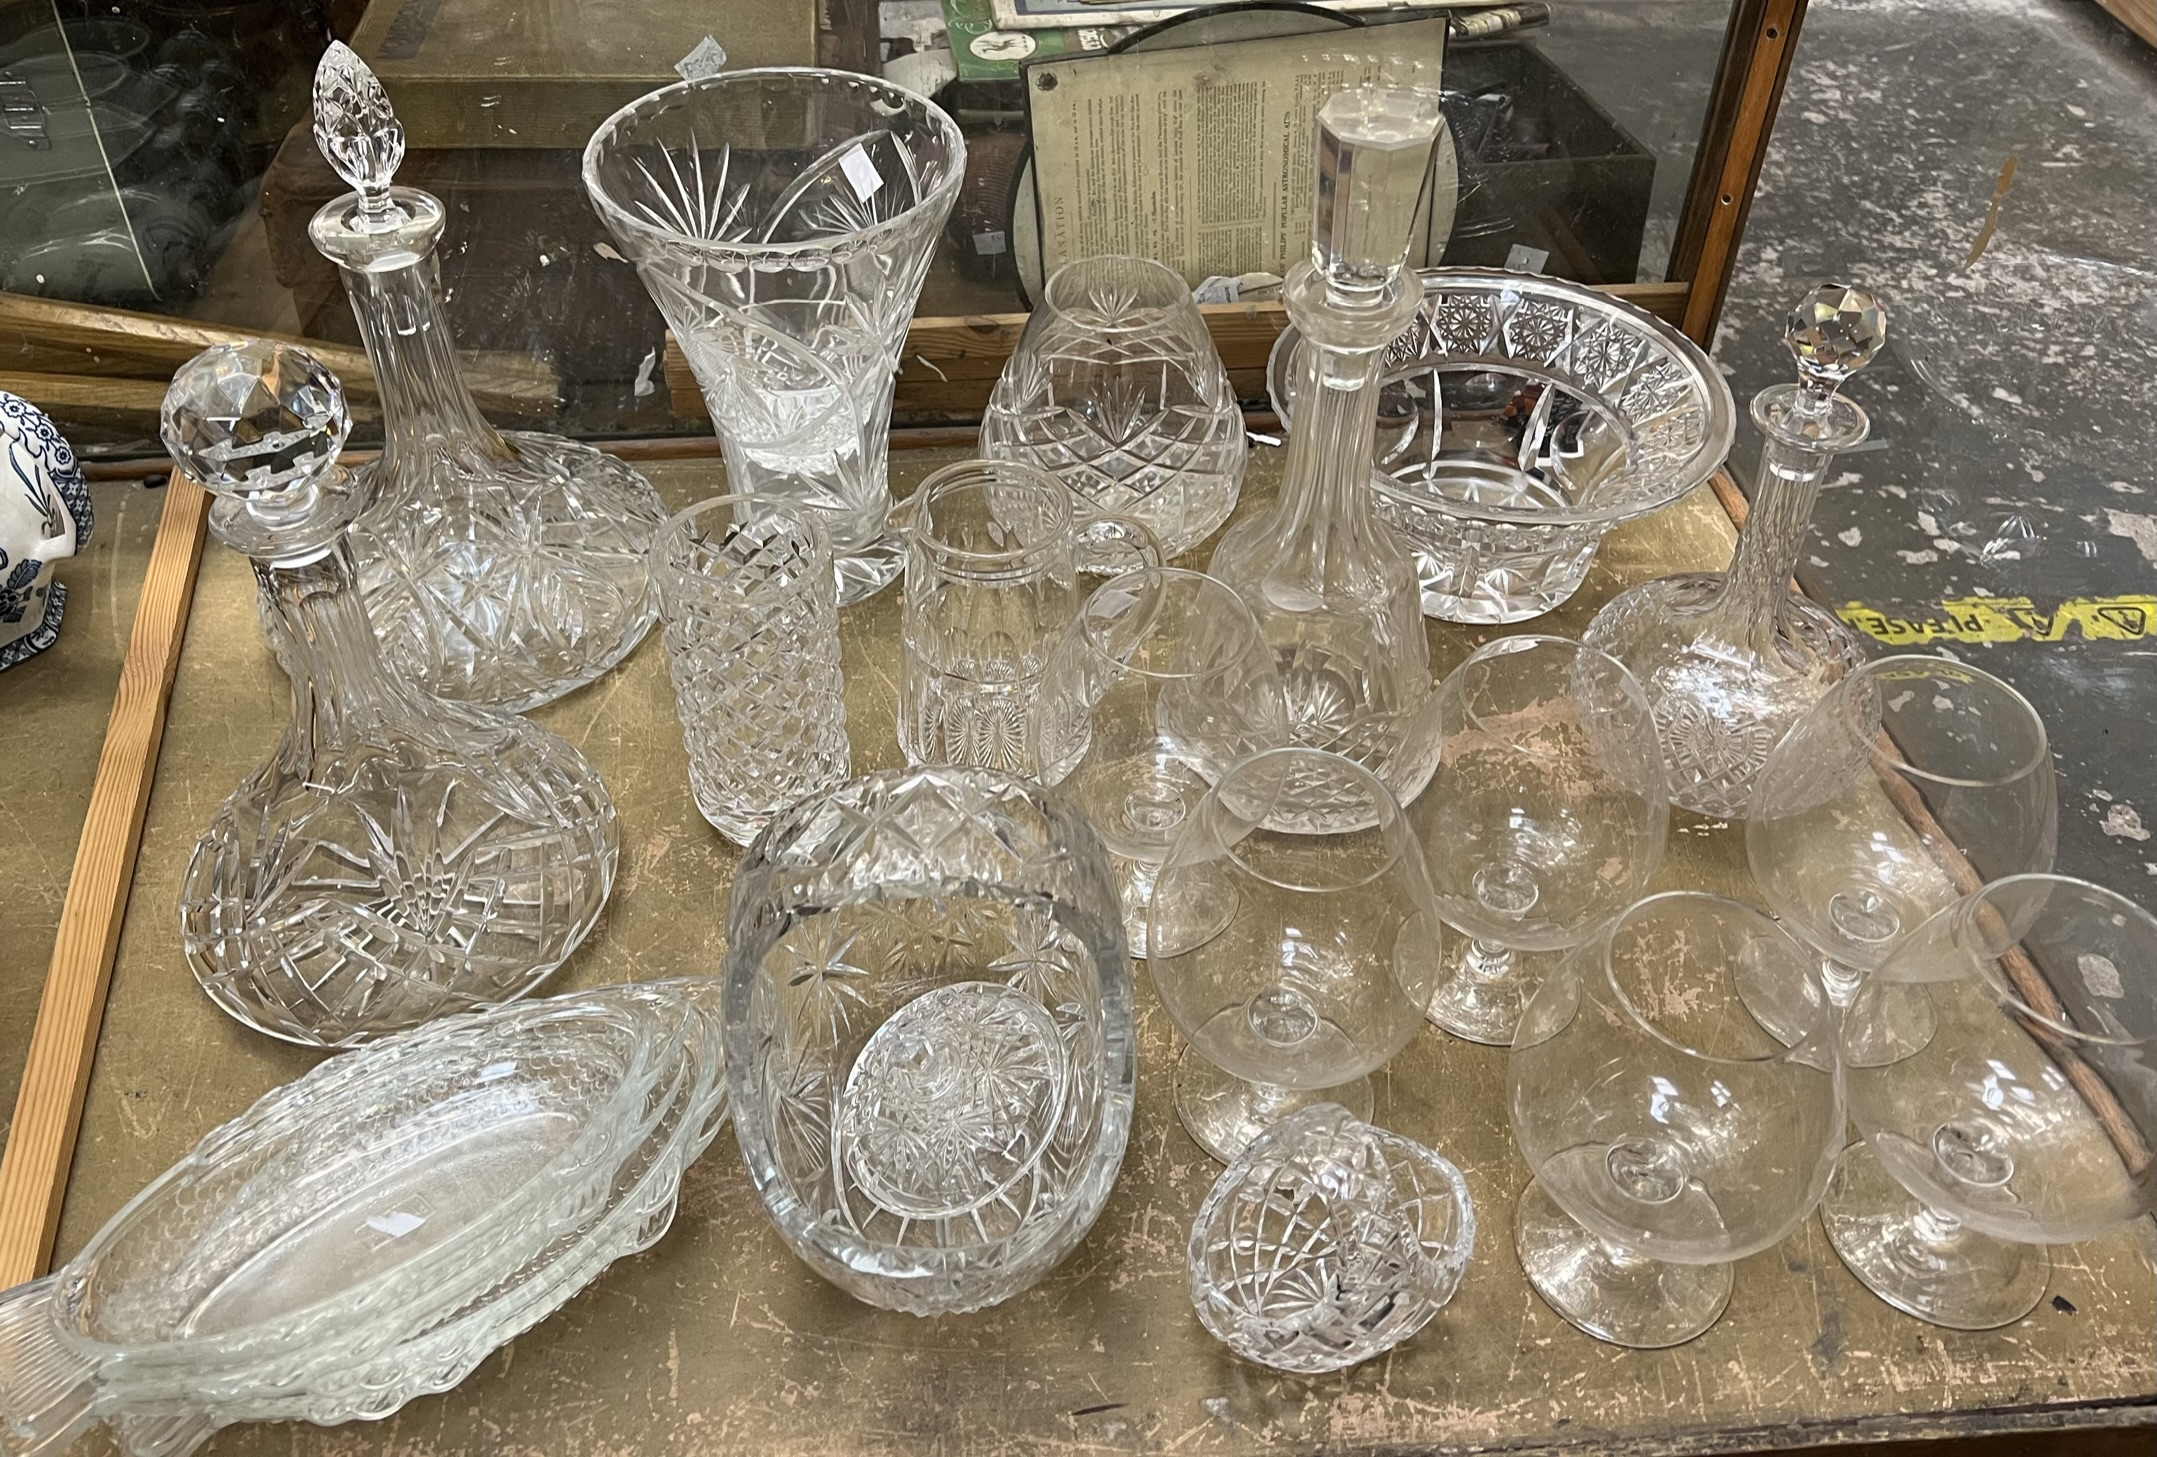 Glass decanters together with a glass vase,